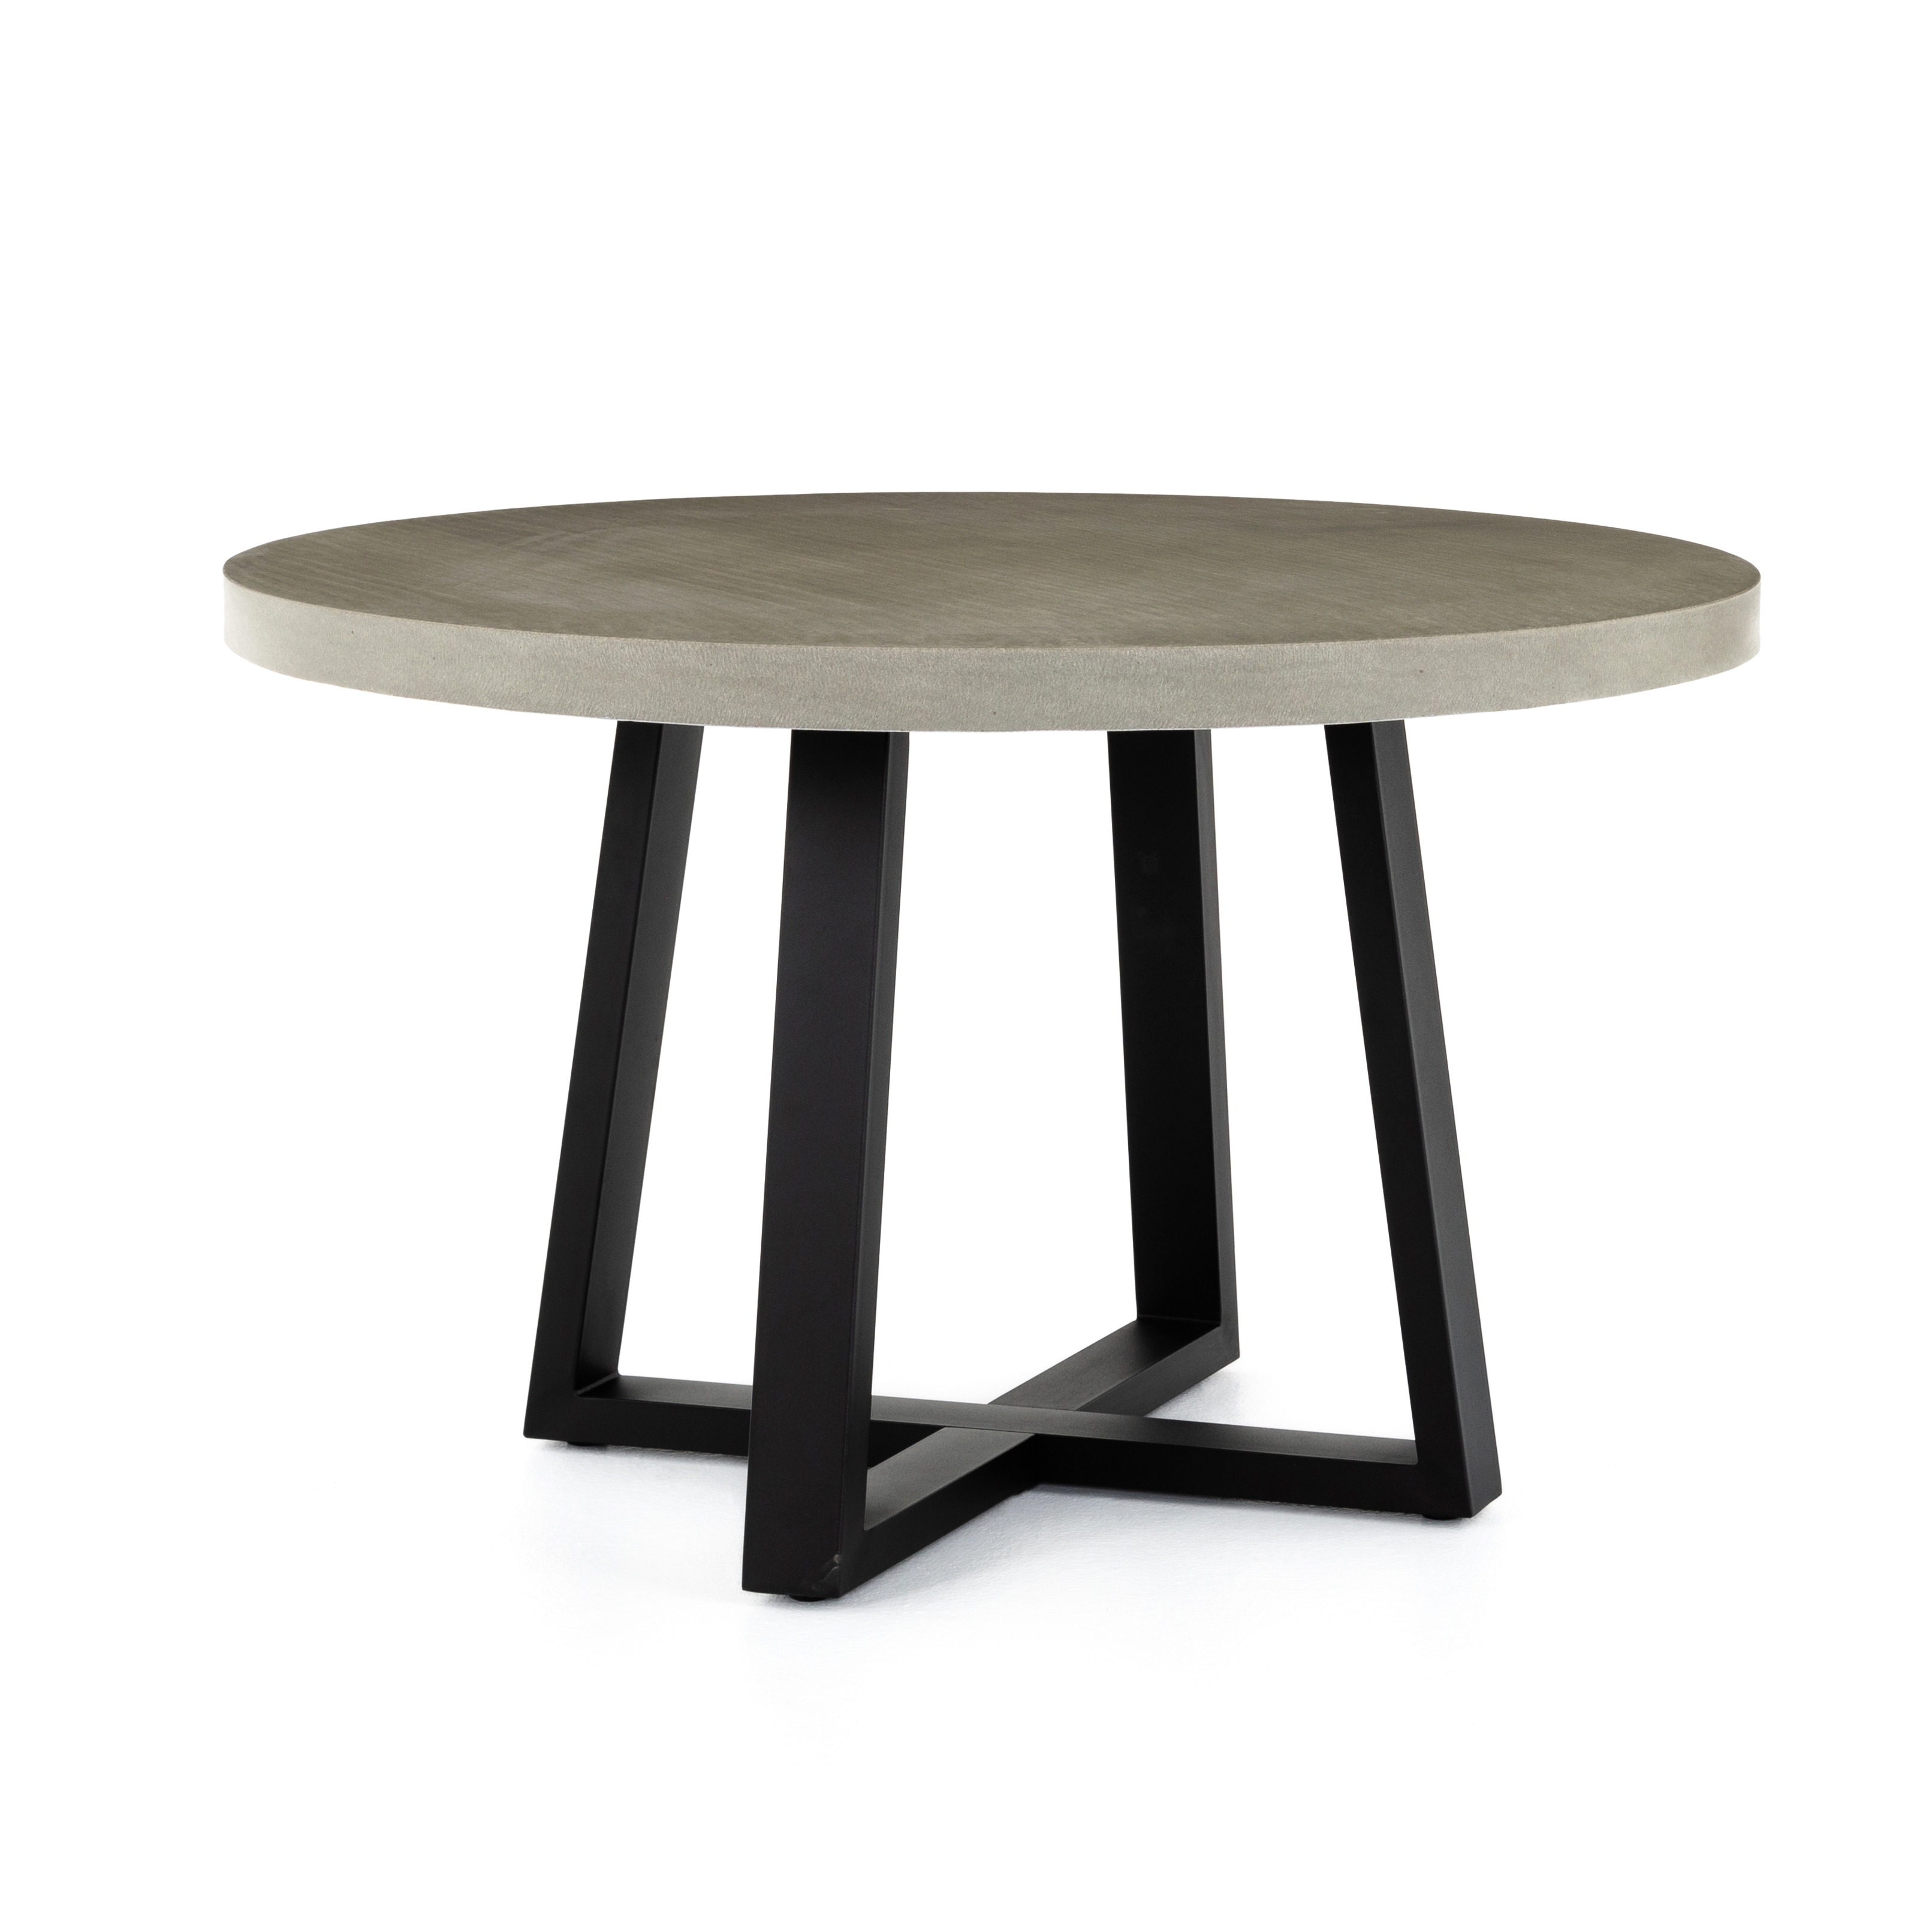 Cyrus Round Outdoor Dining Table 48"